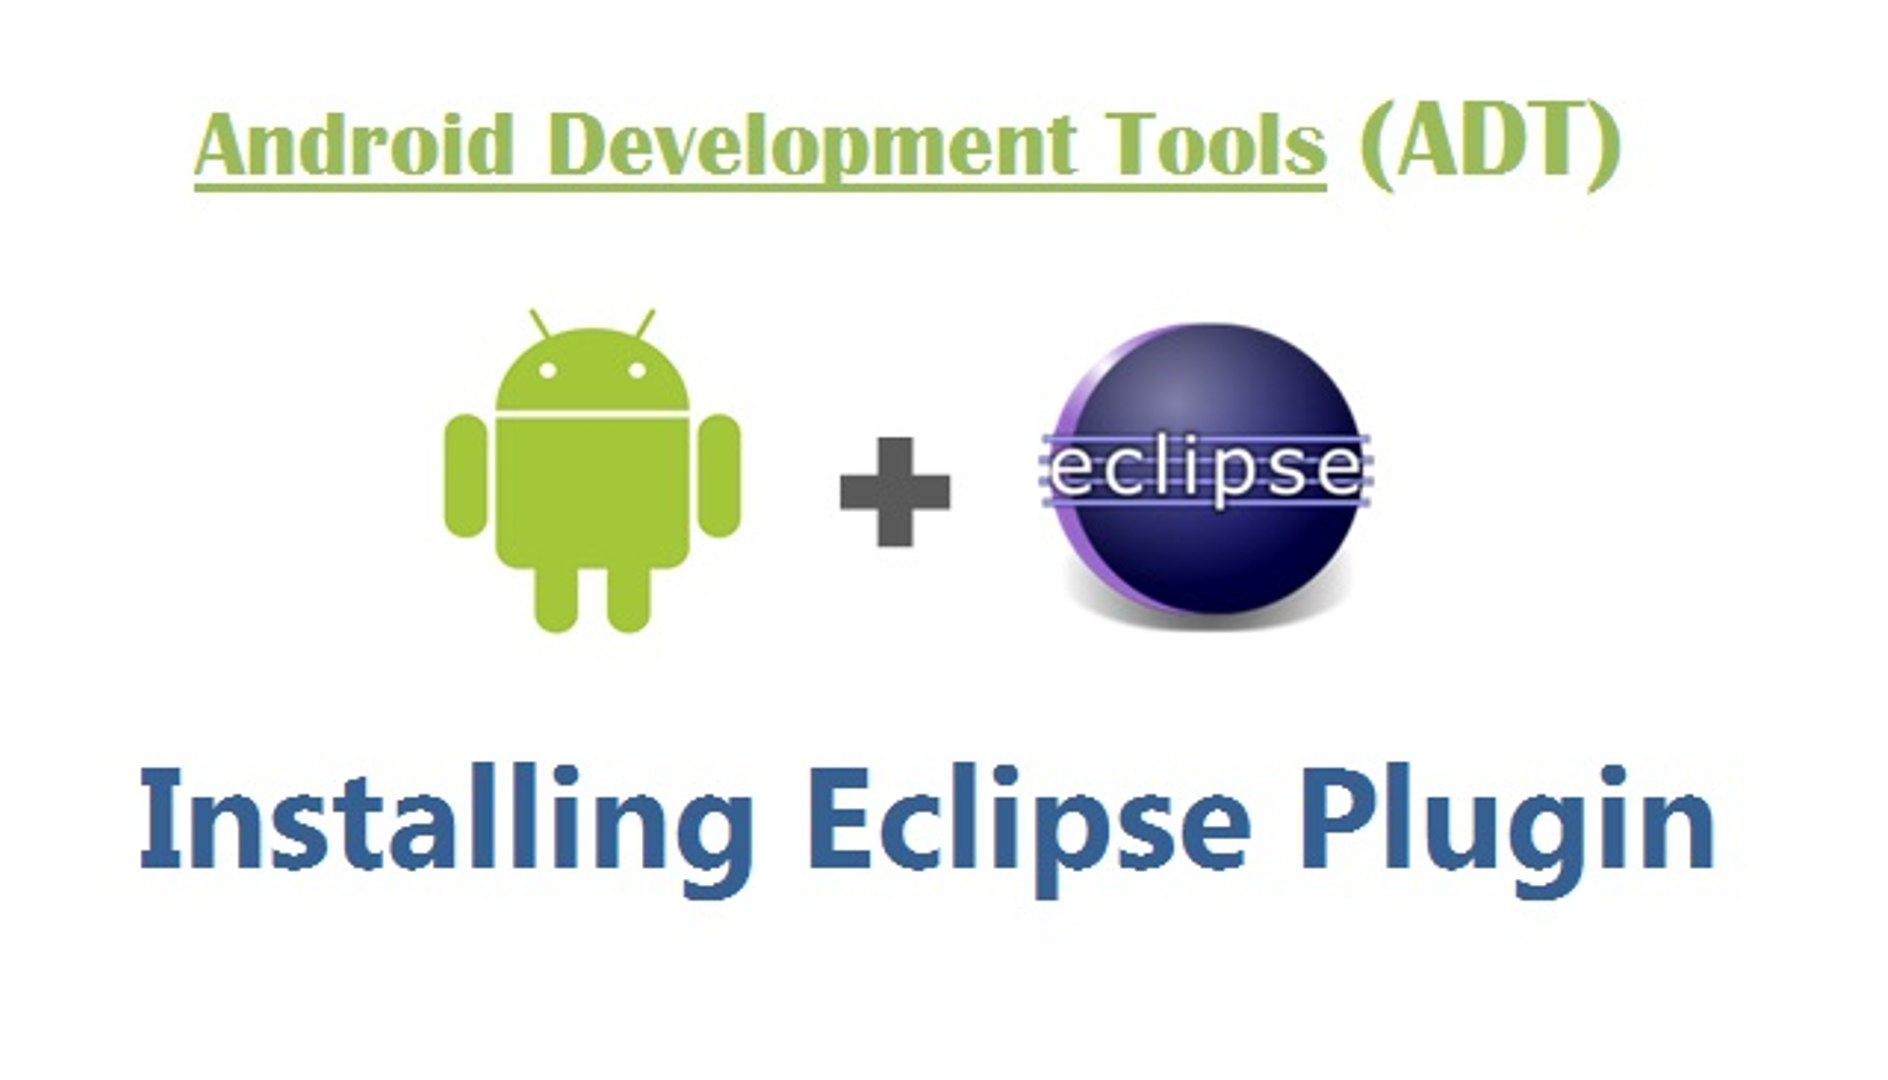 Eclipse android. Плагин для андроид. Android ADT. Android develop.